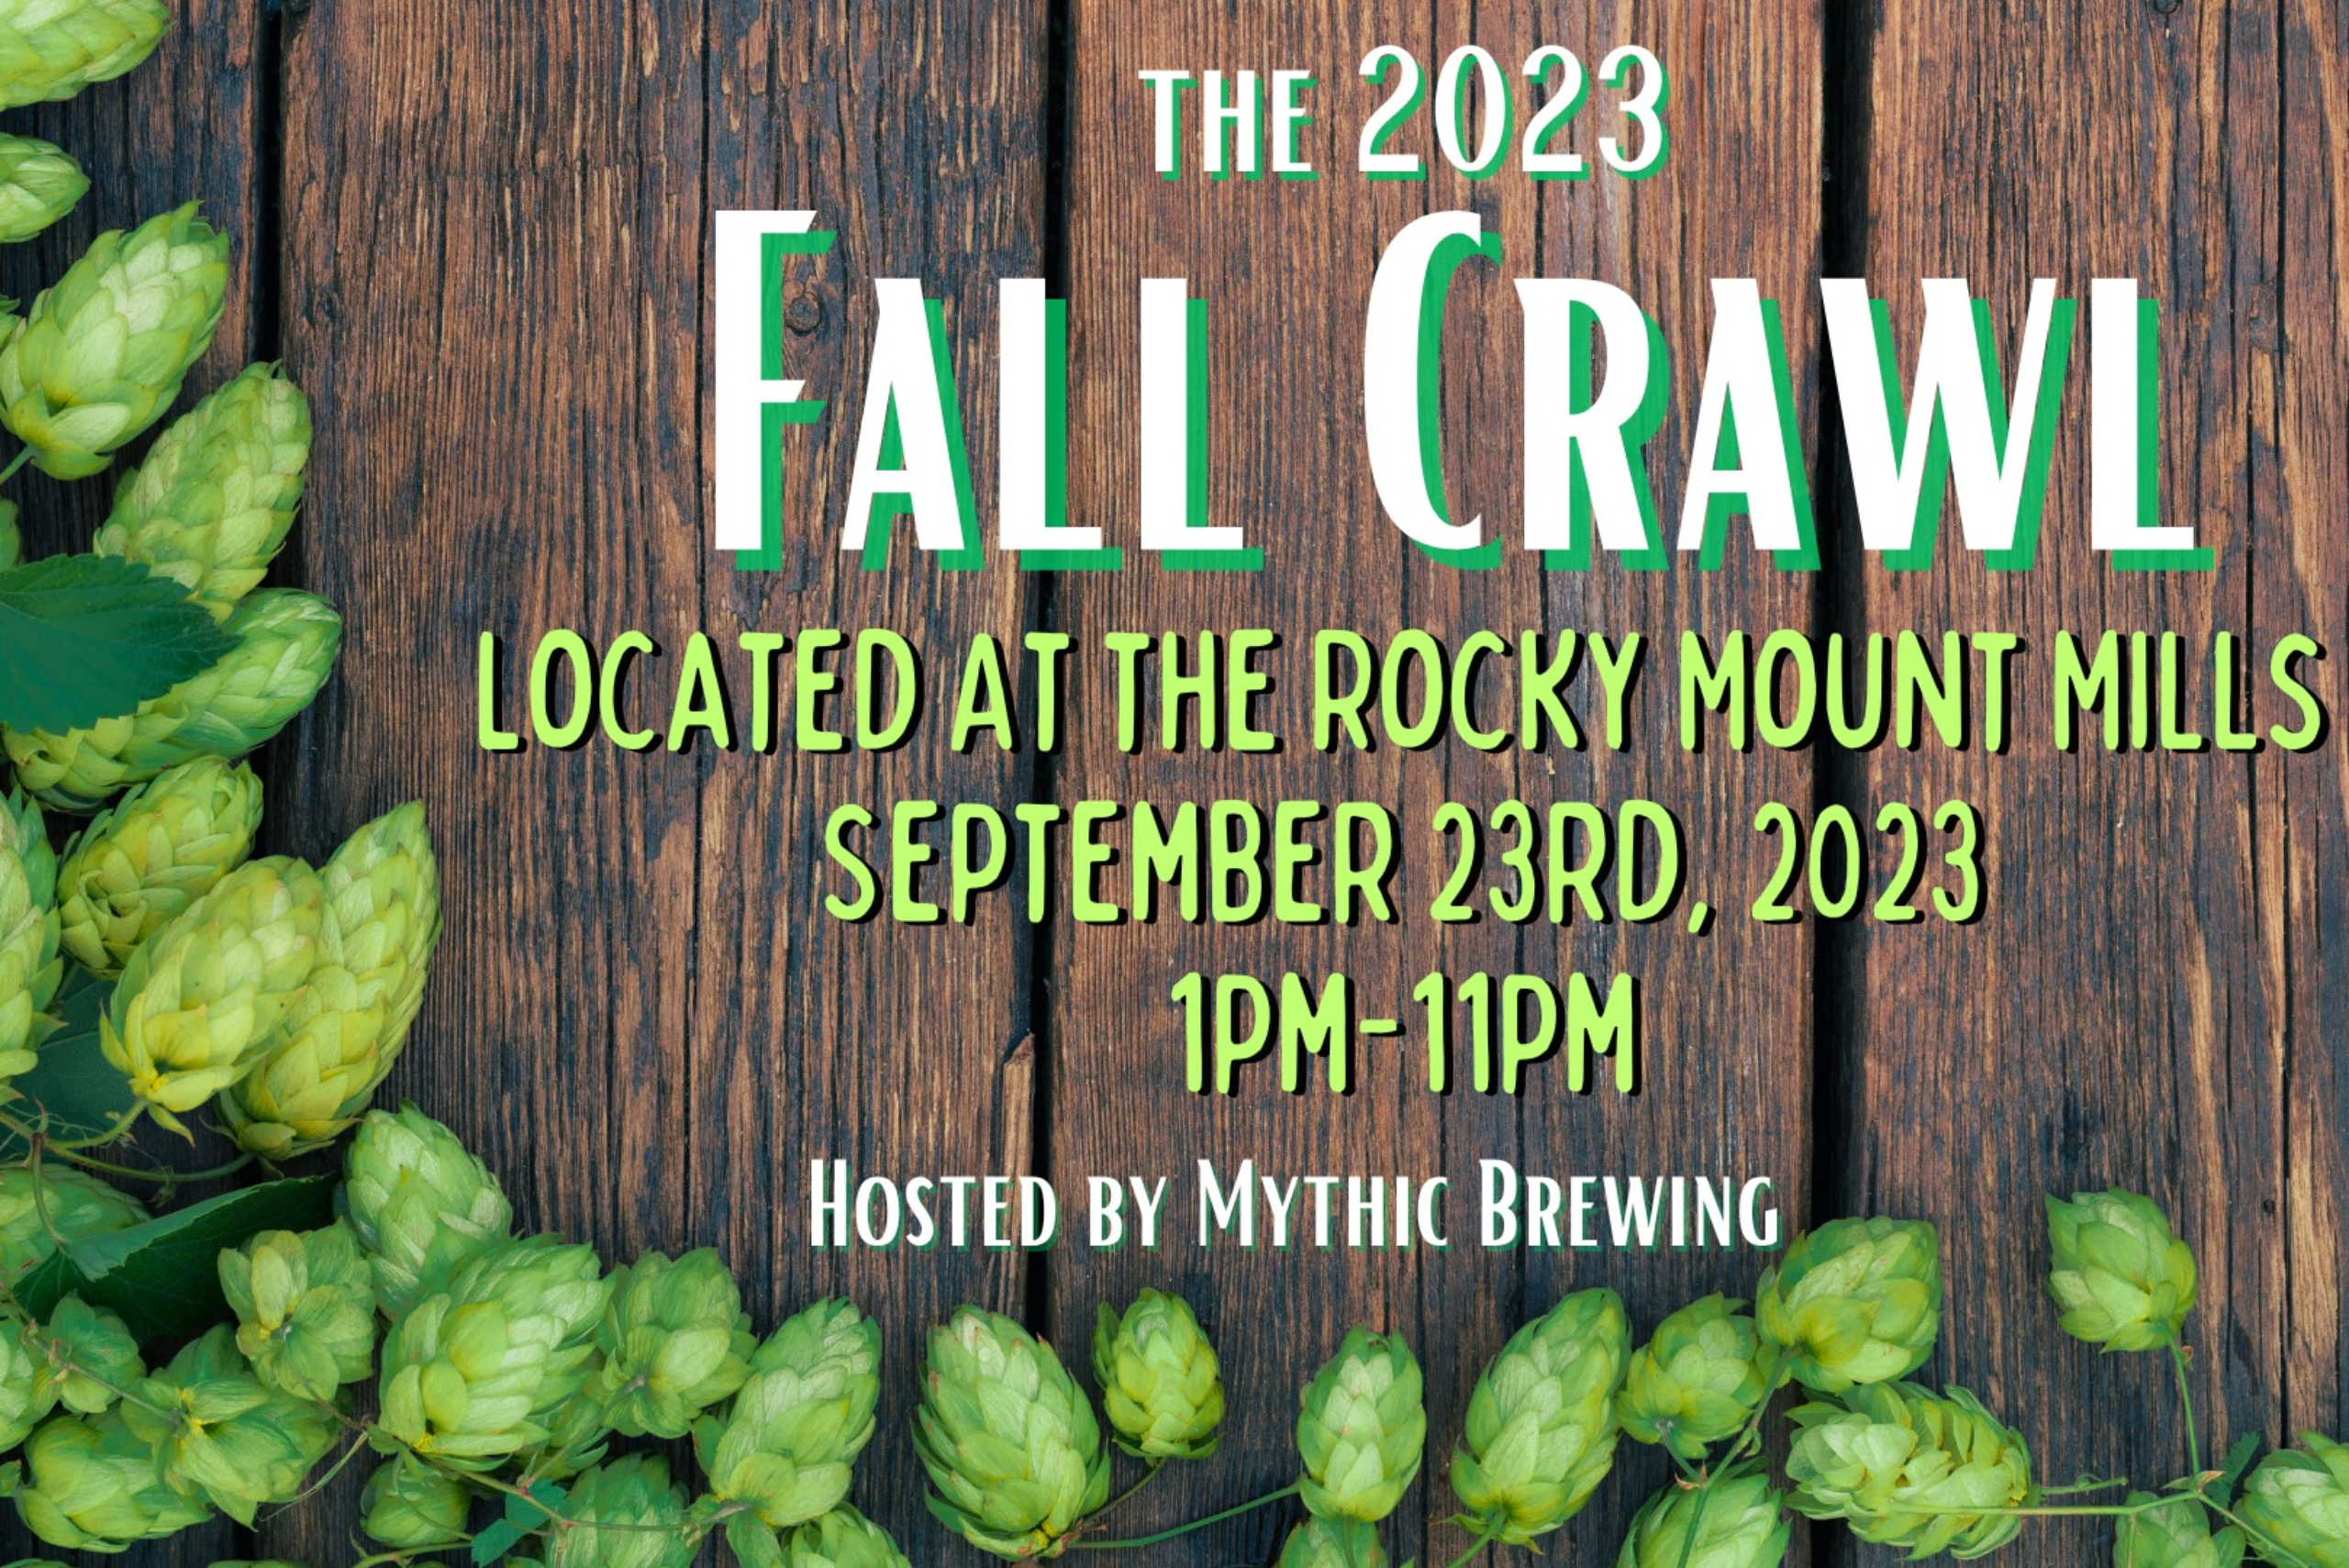 2023 Fall Crawl Hosted by Mythic Brewing